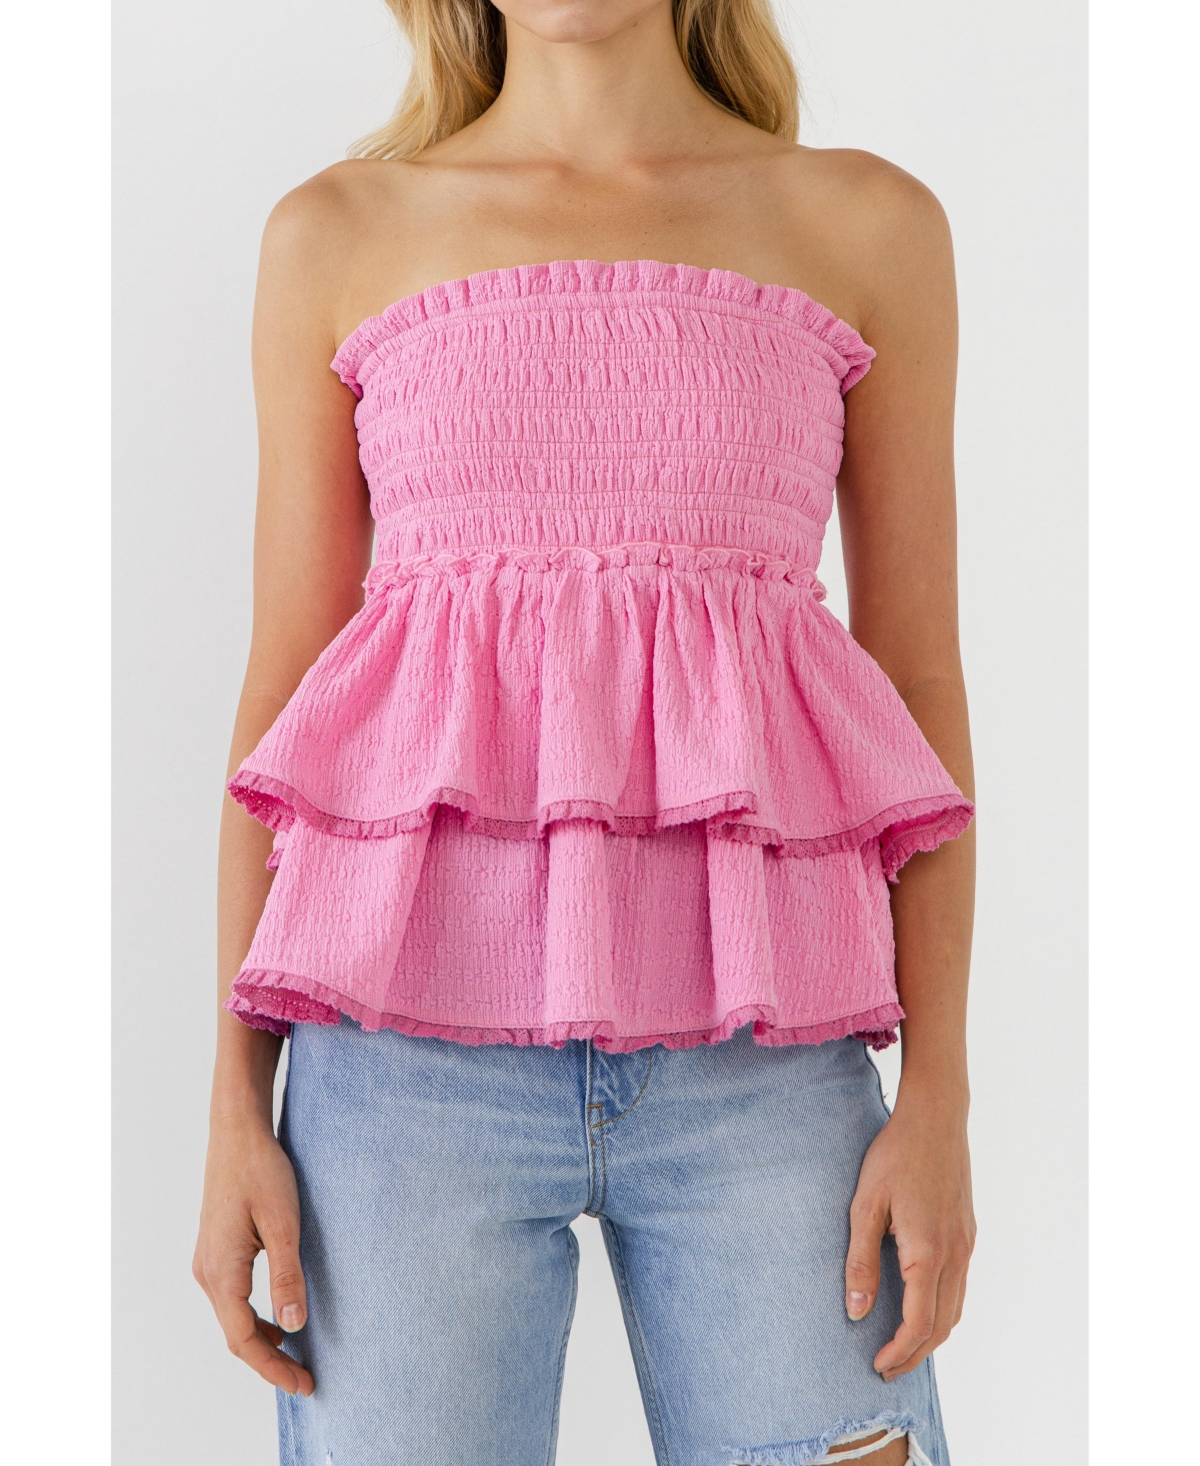 Women's Lace Smocked Knit Ruffled Tube Top - Pink